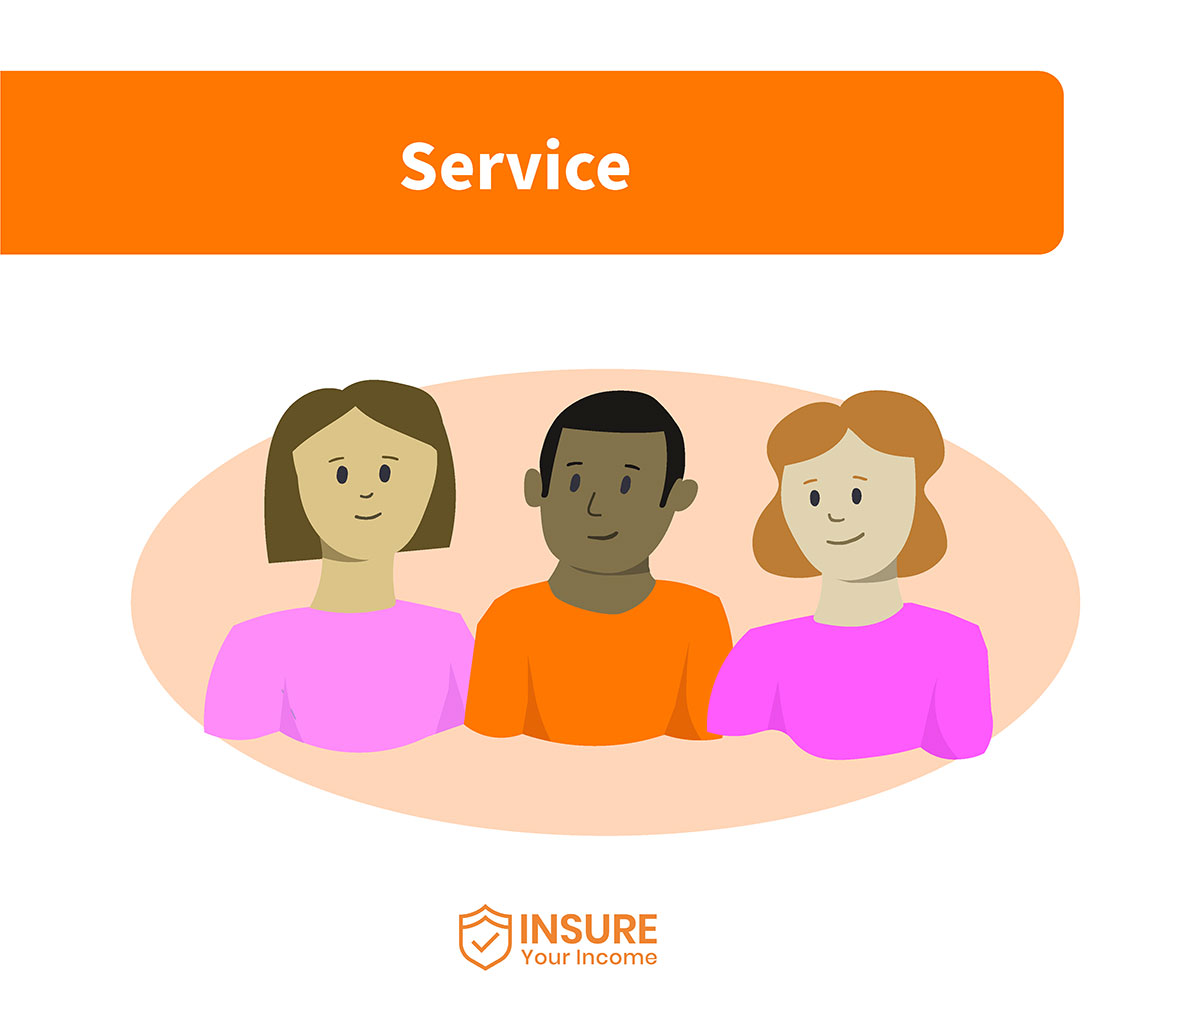 Insure your income for service industry 